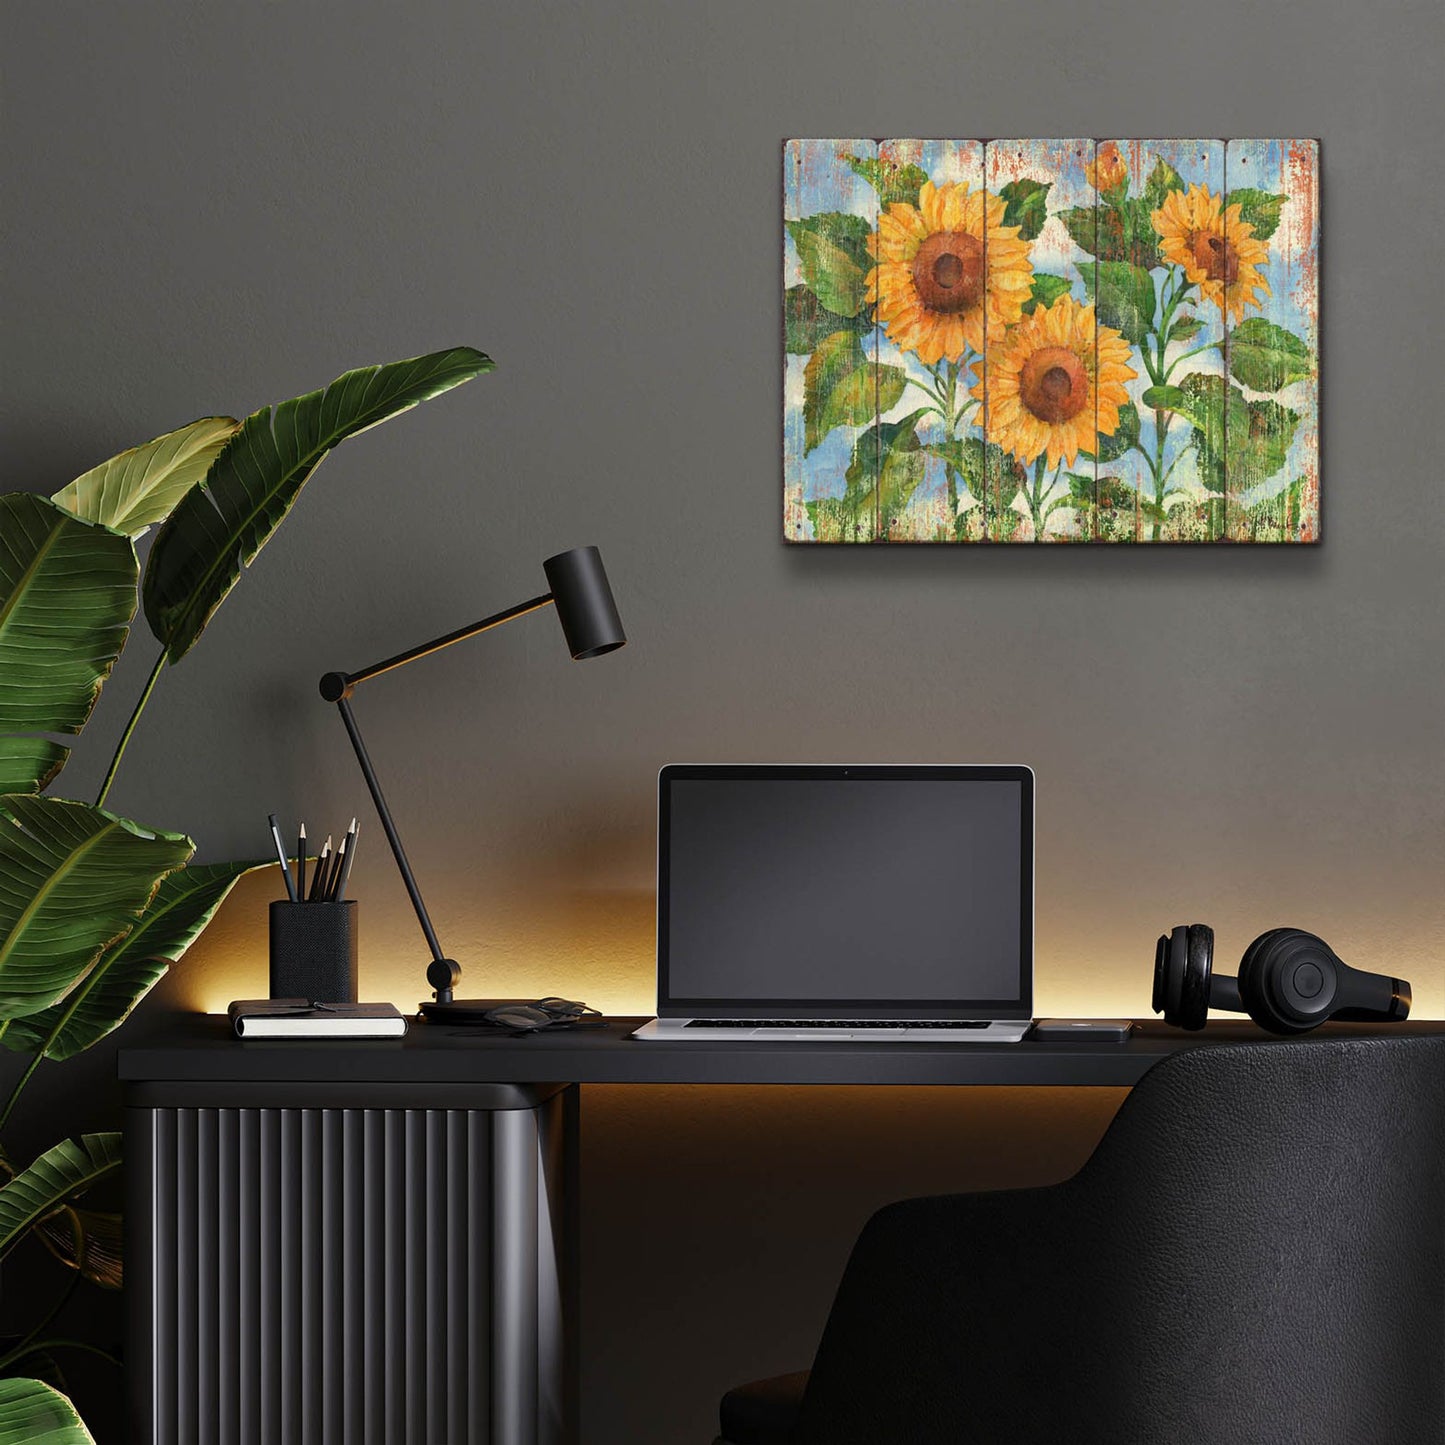 Epic Art 'Summer Sunflowers - Distressed' by Paul Brent, Acrylic Glass Wall Art,16x12